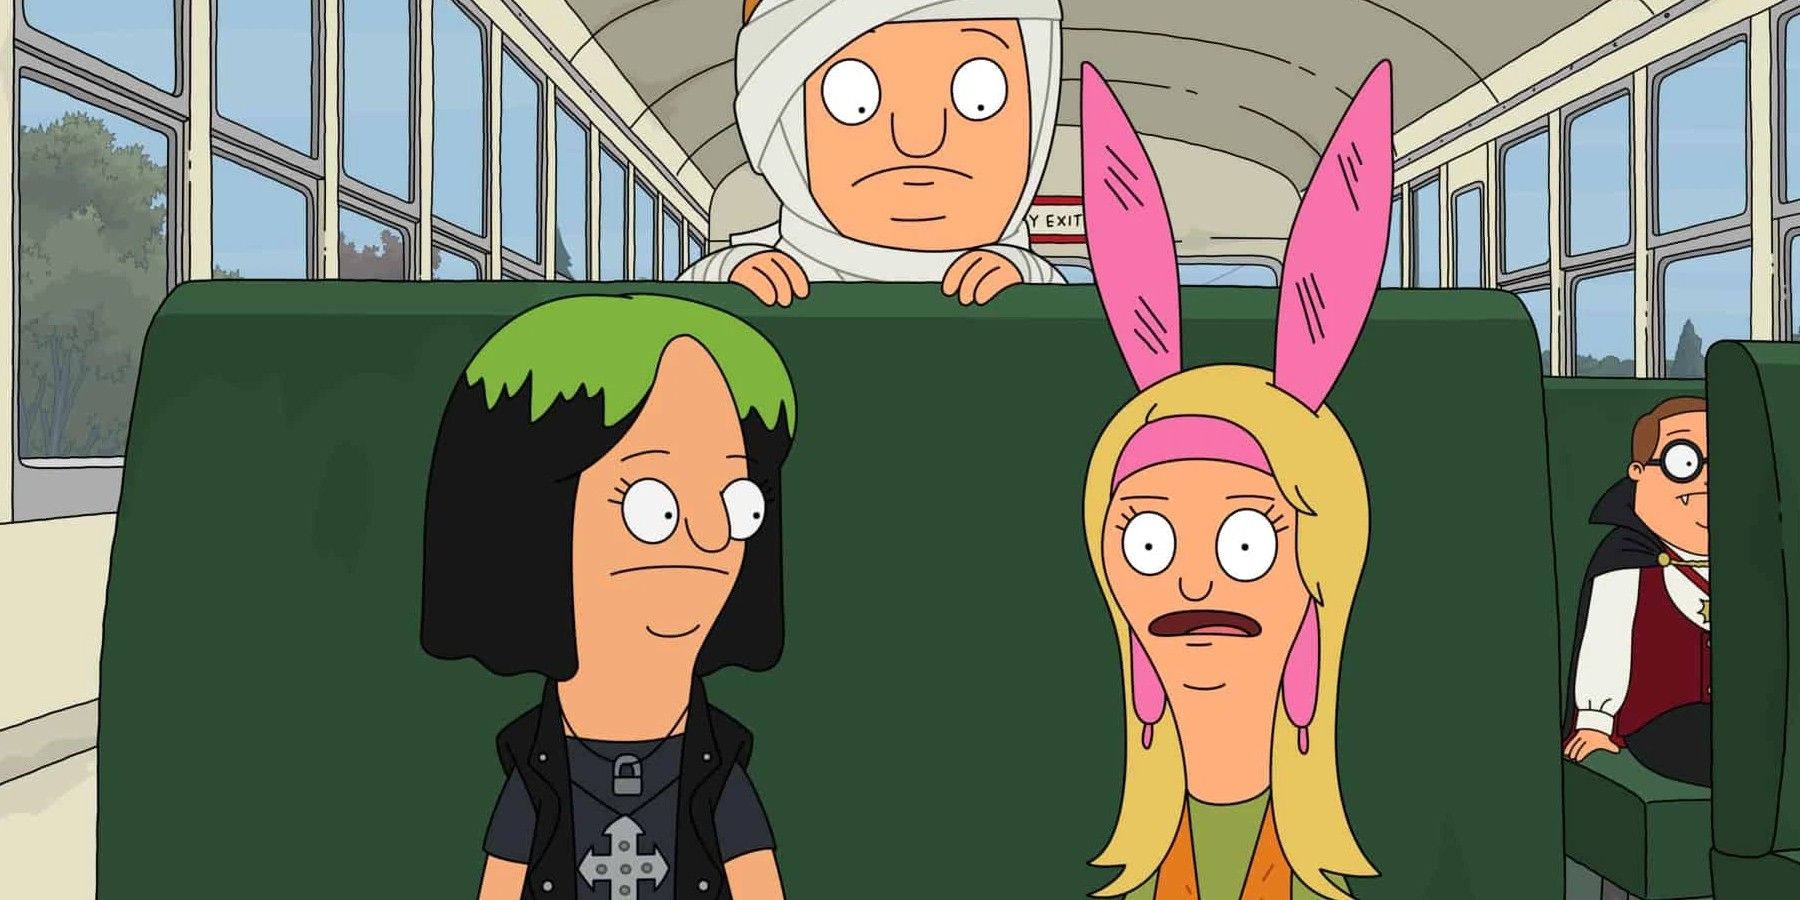 Louise and her friends in costumes on the bus in Bob's Burgers